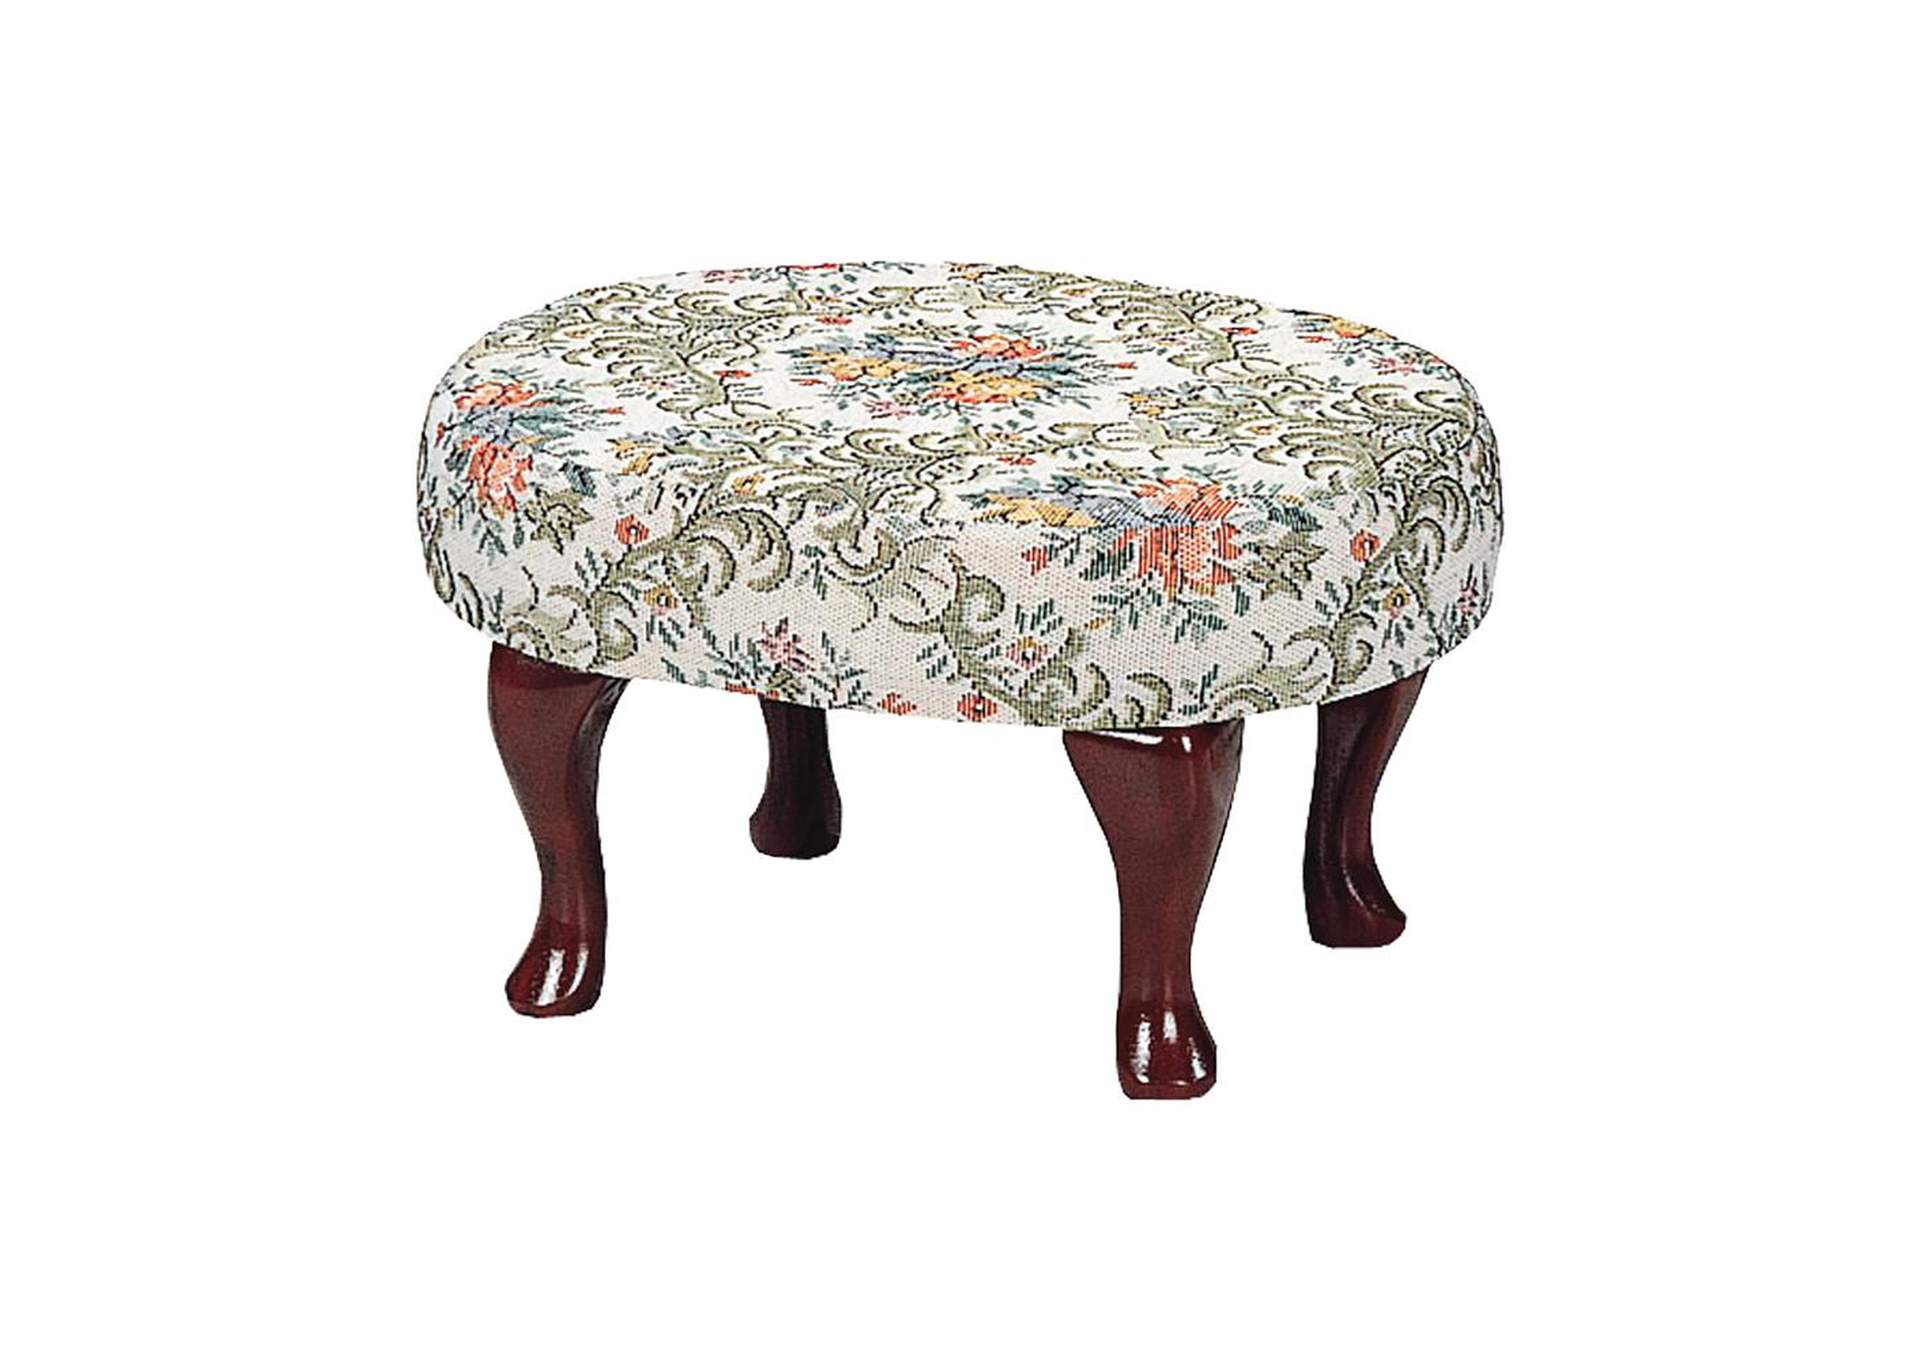 Upholstered Foot Stool Beige And Green,Coaster Furniture